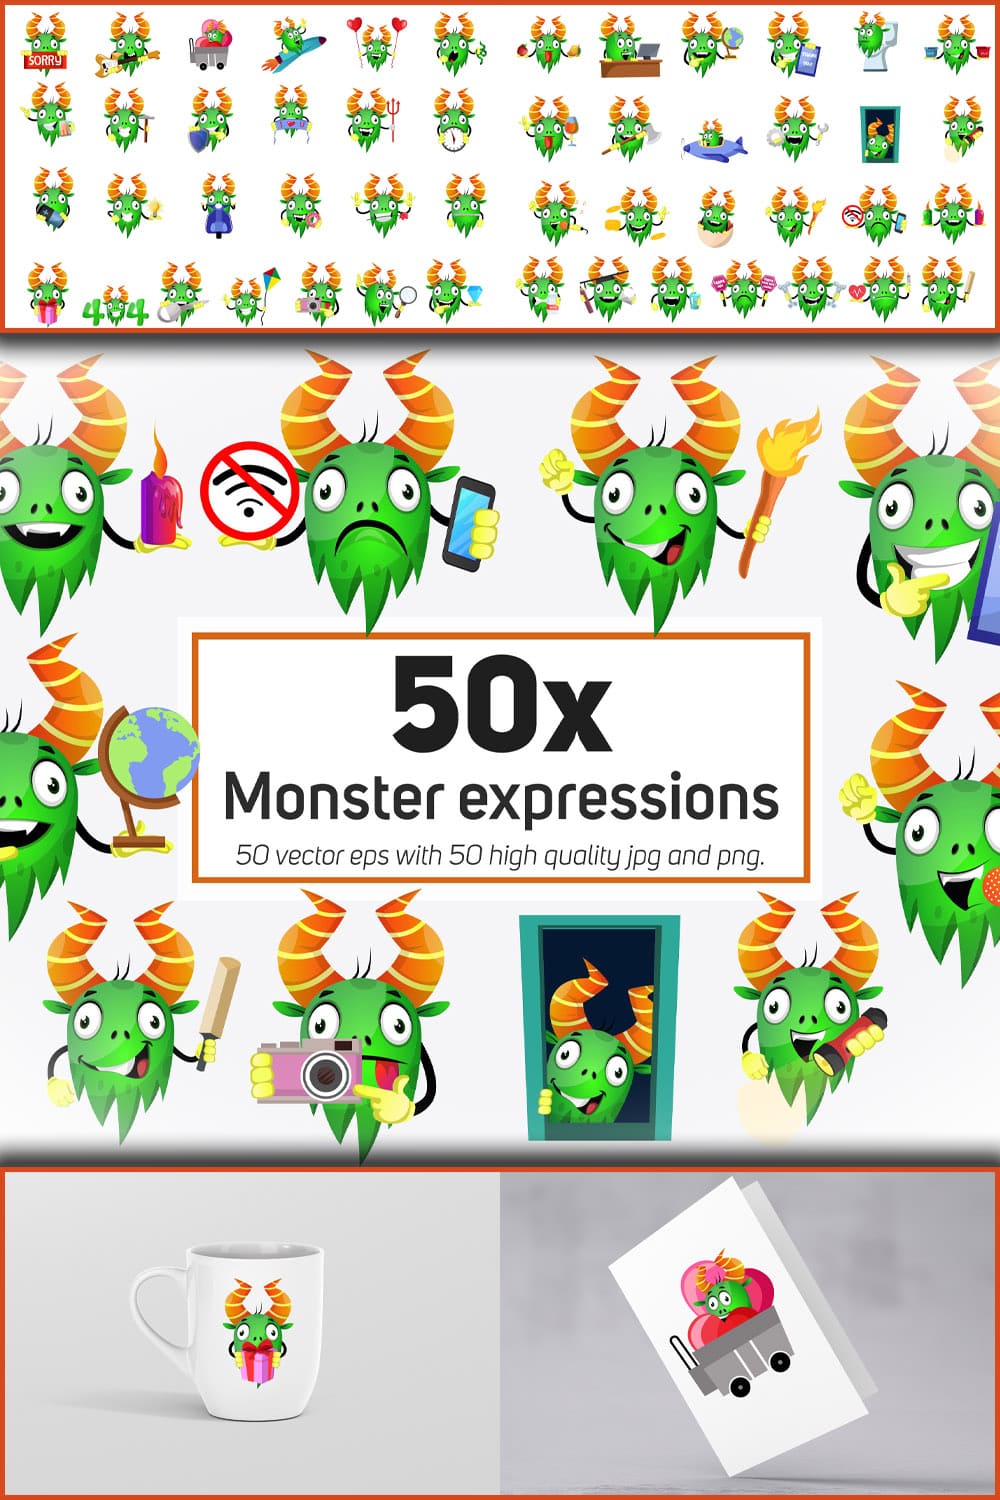 Monster expressions or emoticon collection of pinterest.